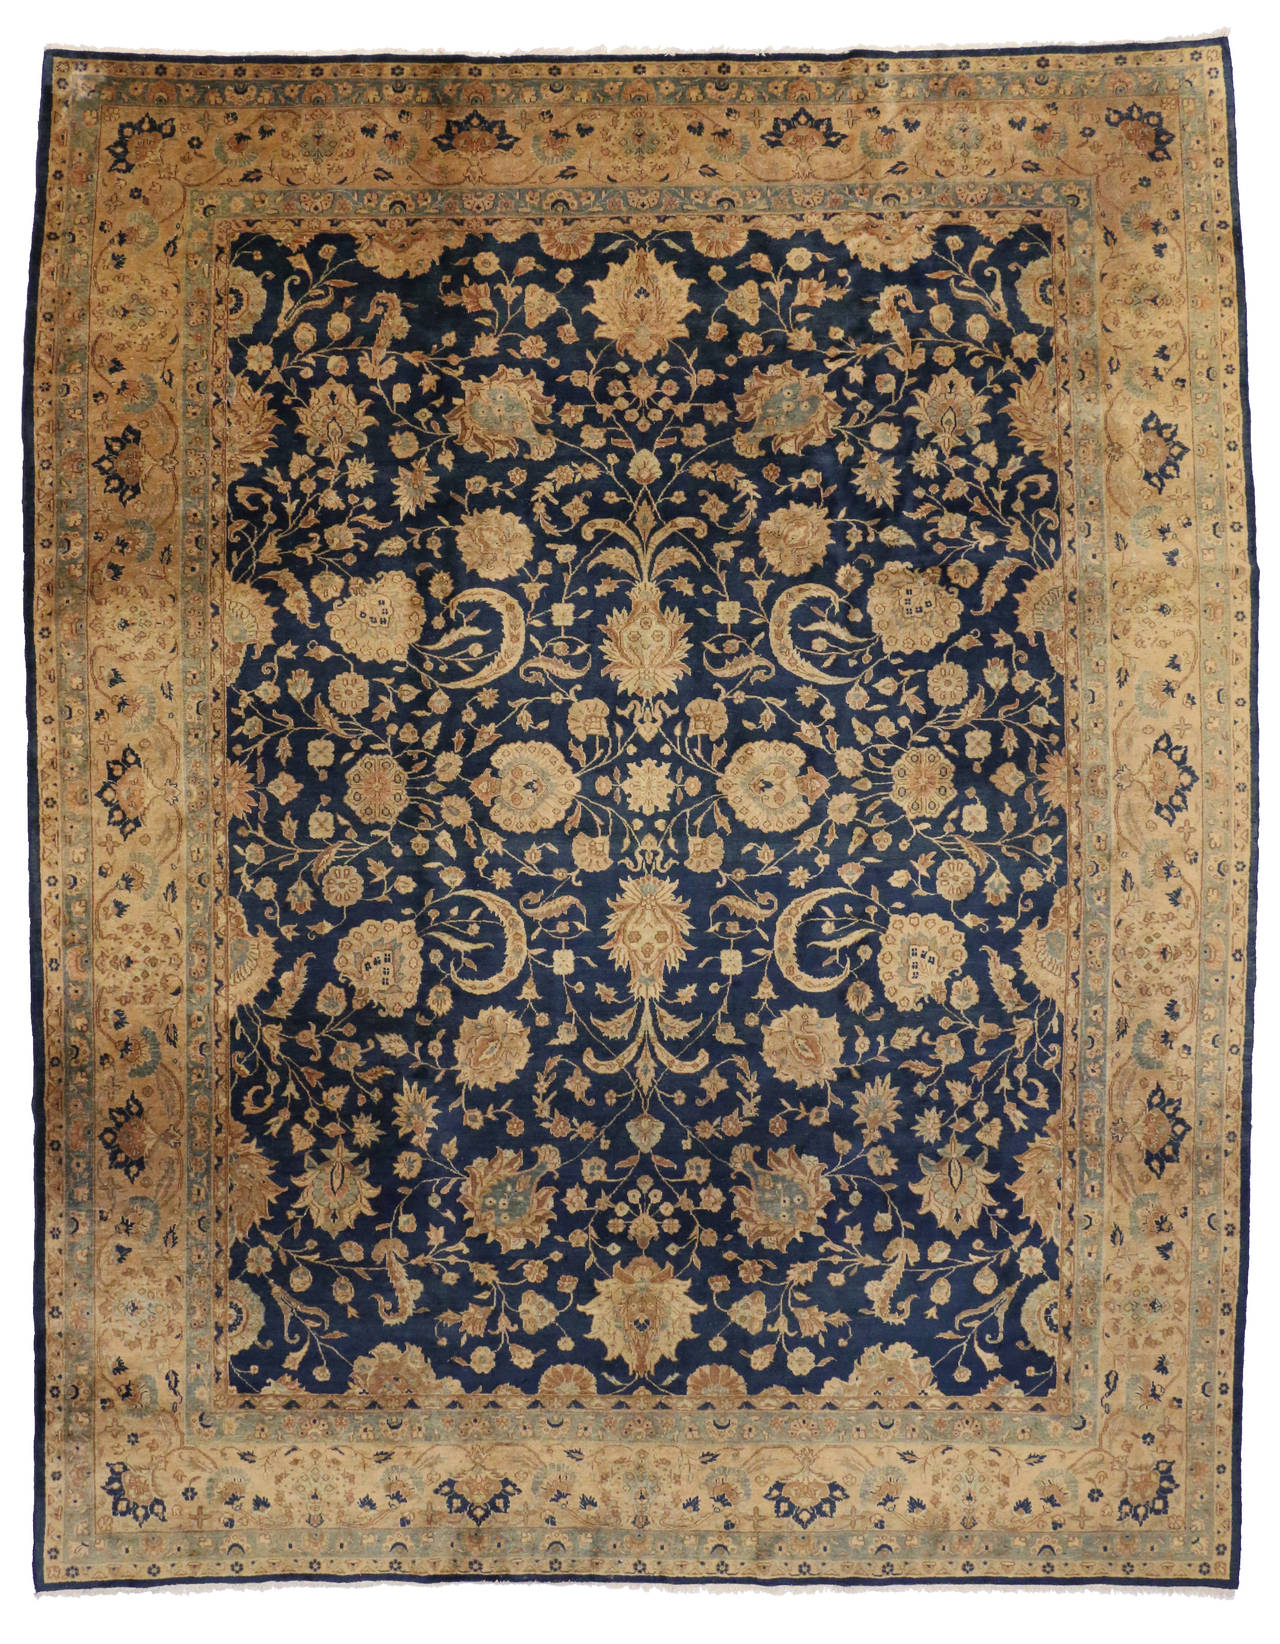 73489 Antique Indian Agra Rug with Hollywood Regency Style. Saturated in an extraordinary palette of midnight navy blue and golden fawn, this antique Indian Agra showcases an exquisite allover pattern. The arabesque vines meander through a medley of